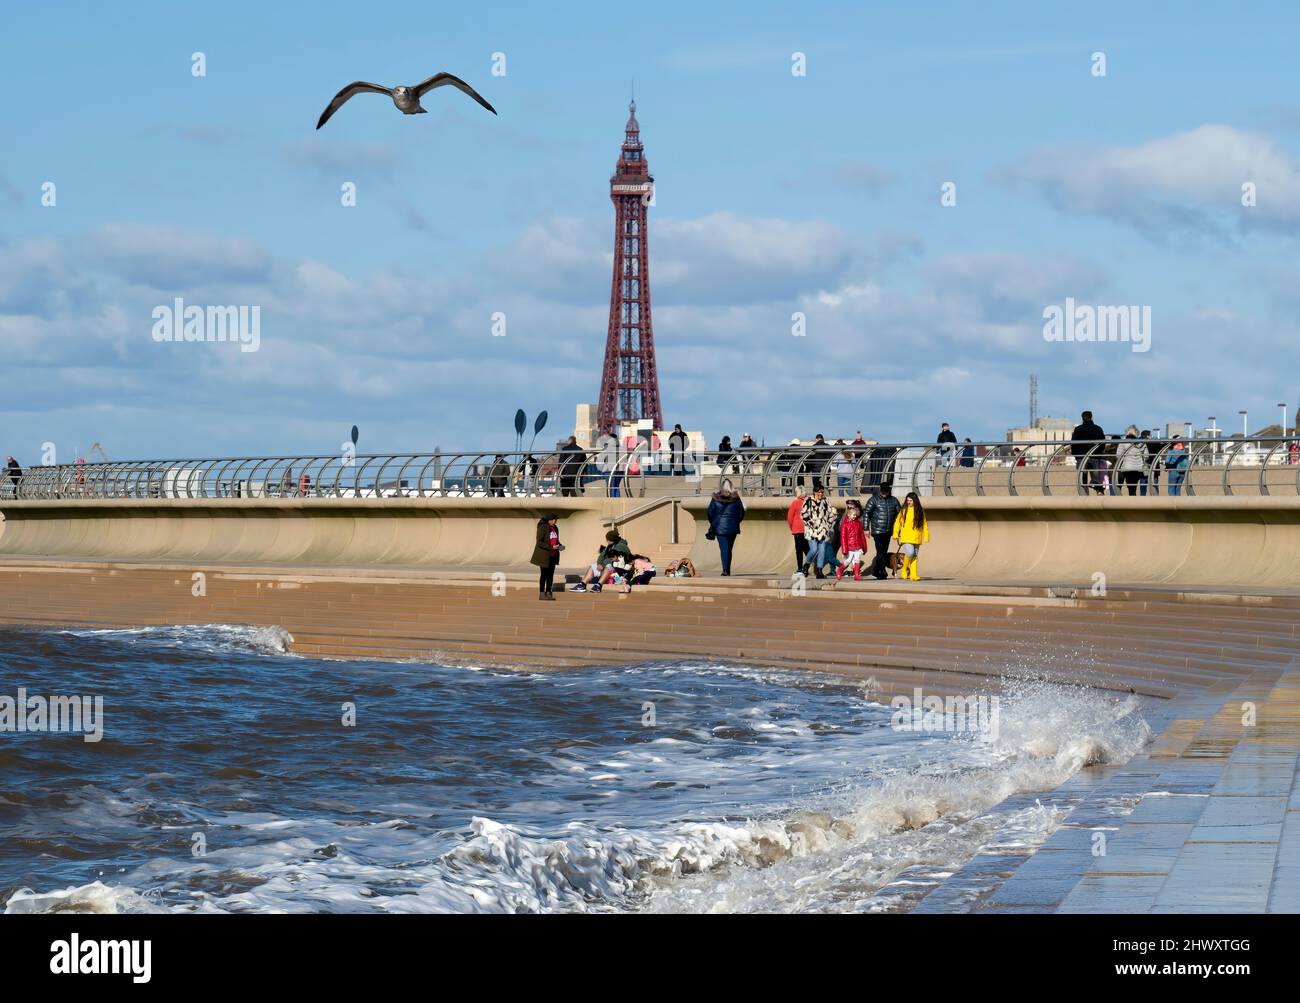 On a bright sunny day, holidaymakers hit the sandy beach under the shadow of the world famous Blackpool Tower in Blackpool, Lancashire, UK Stock Photo